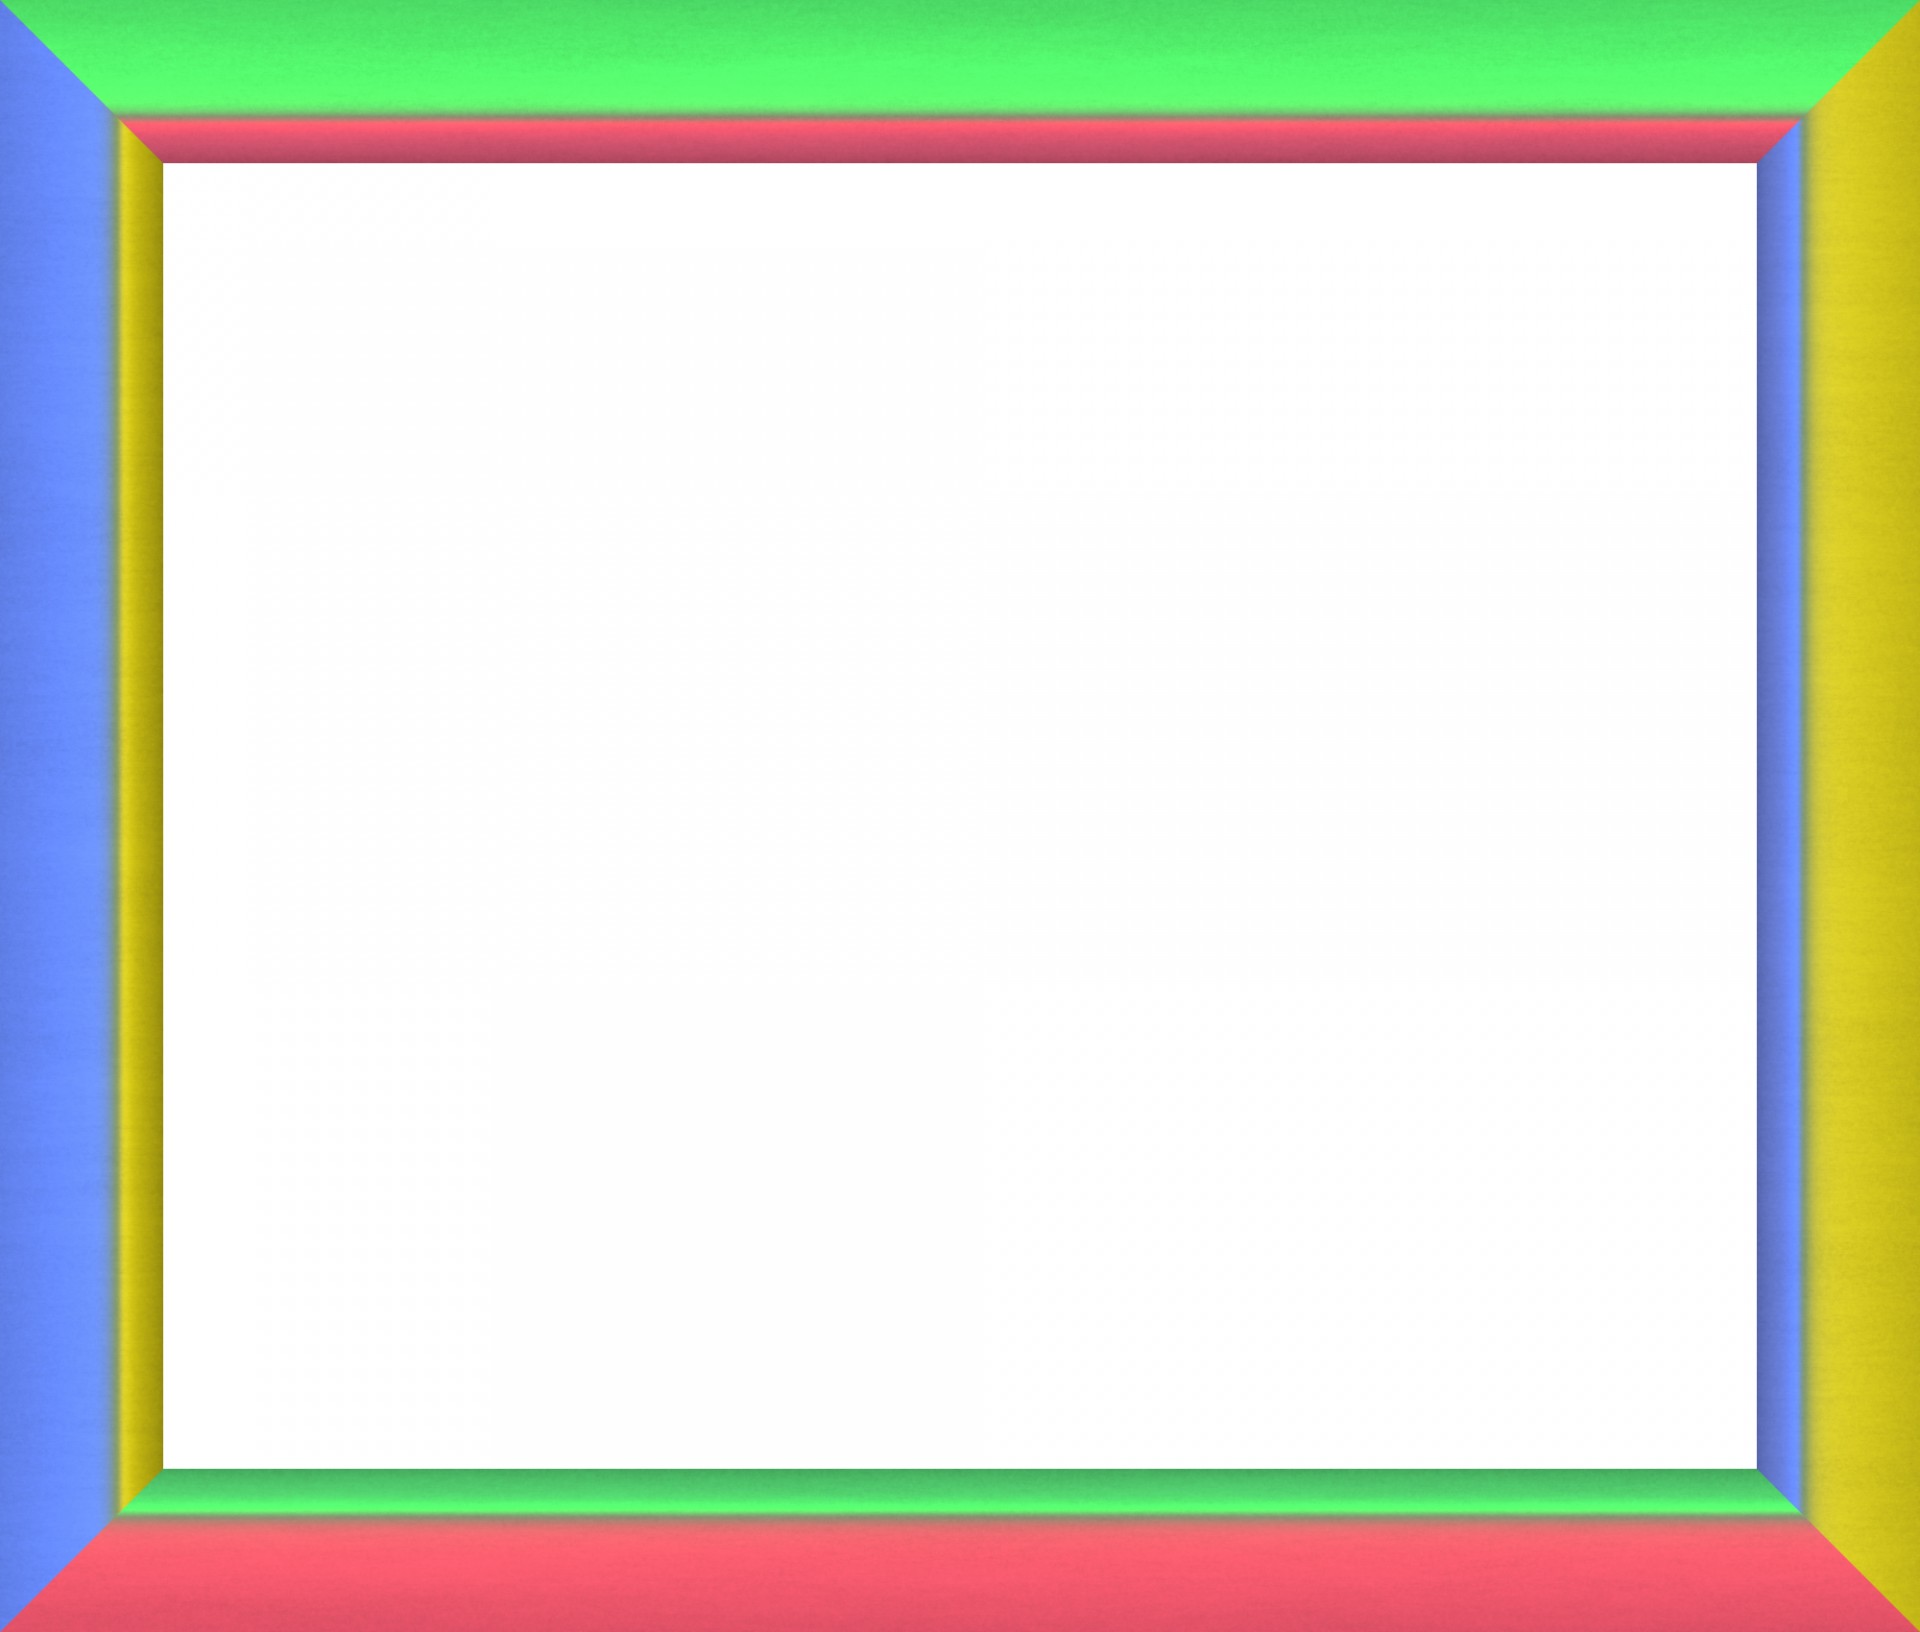 A very colorful frame that is 2000x1700 pixels in size. This frame was created in Filter Forge.